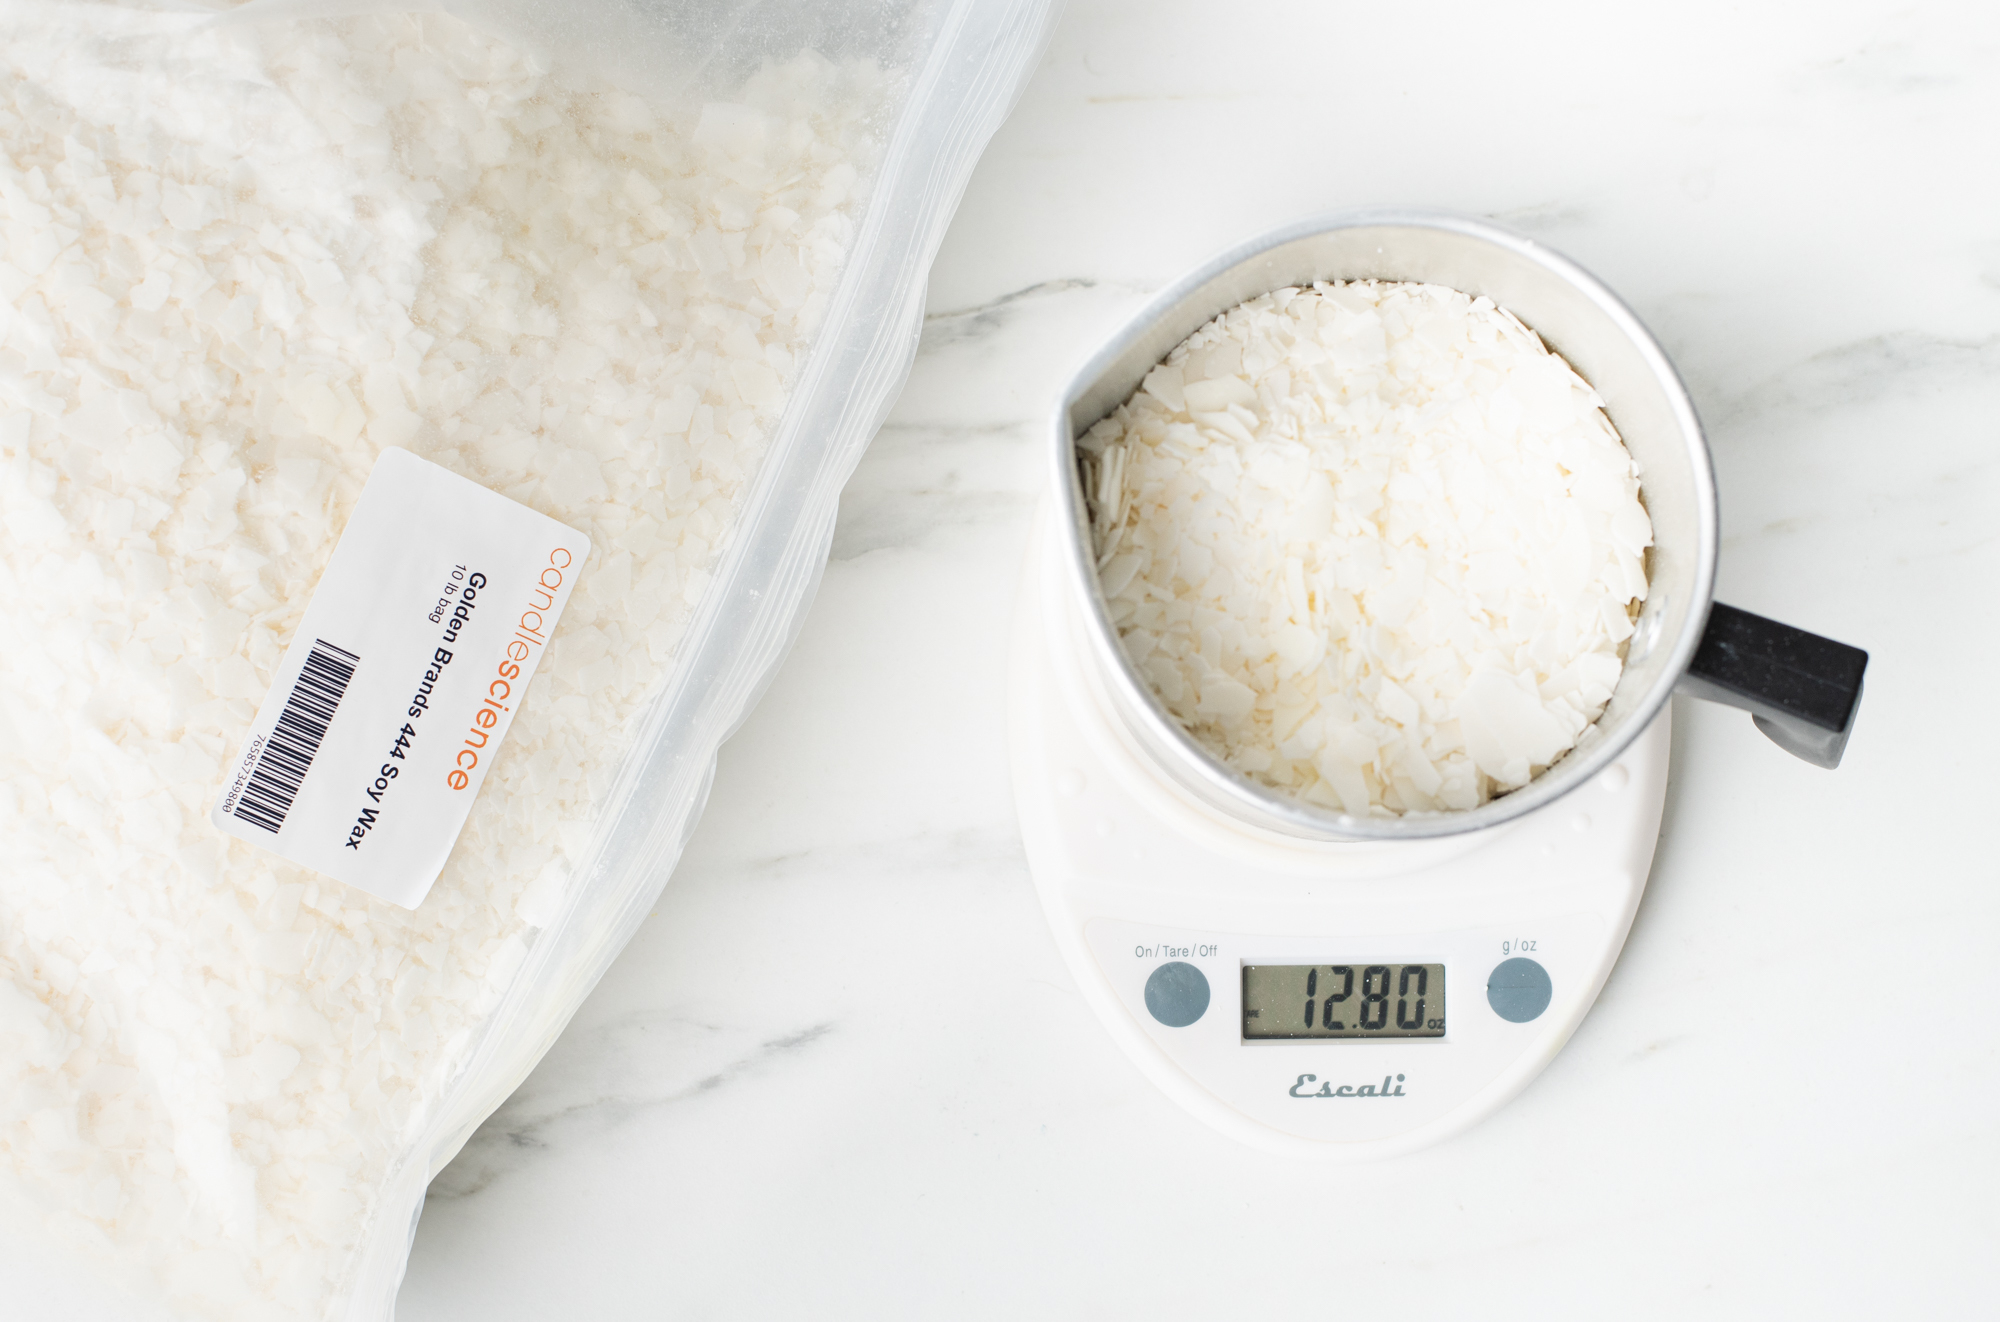 Weighing wax on a digital scale.